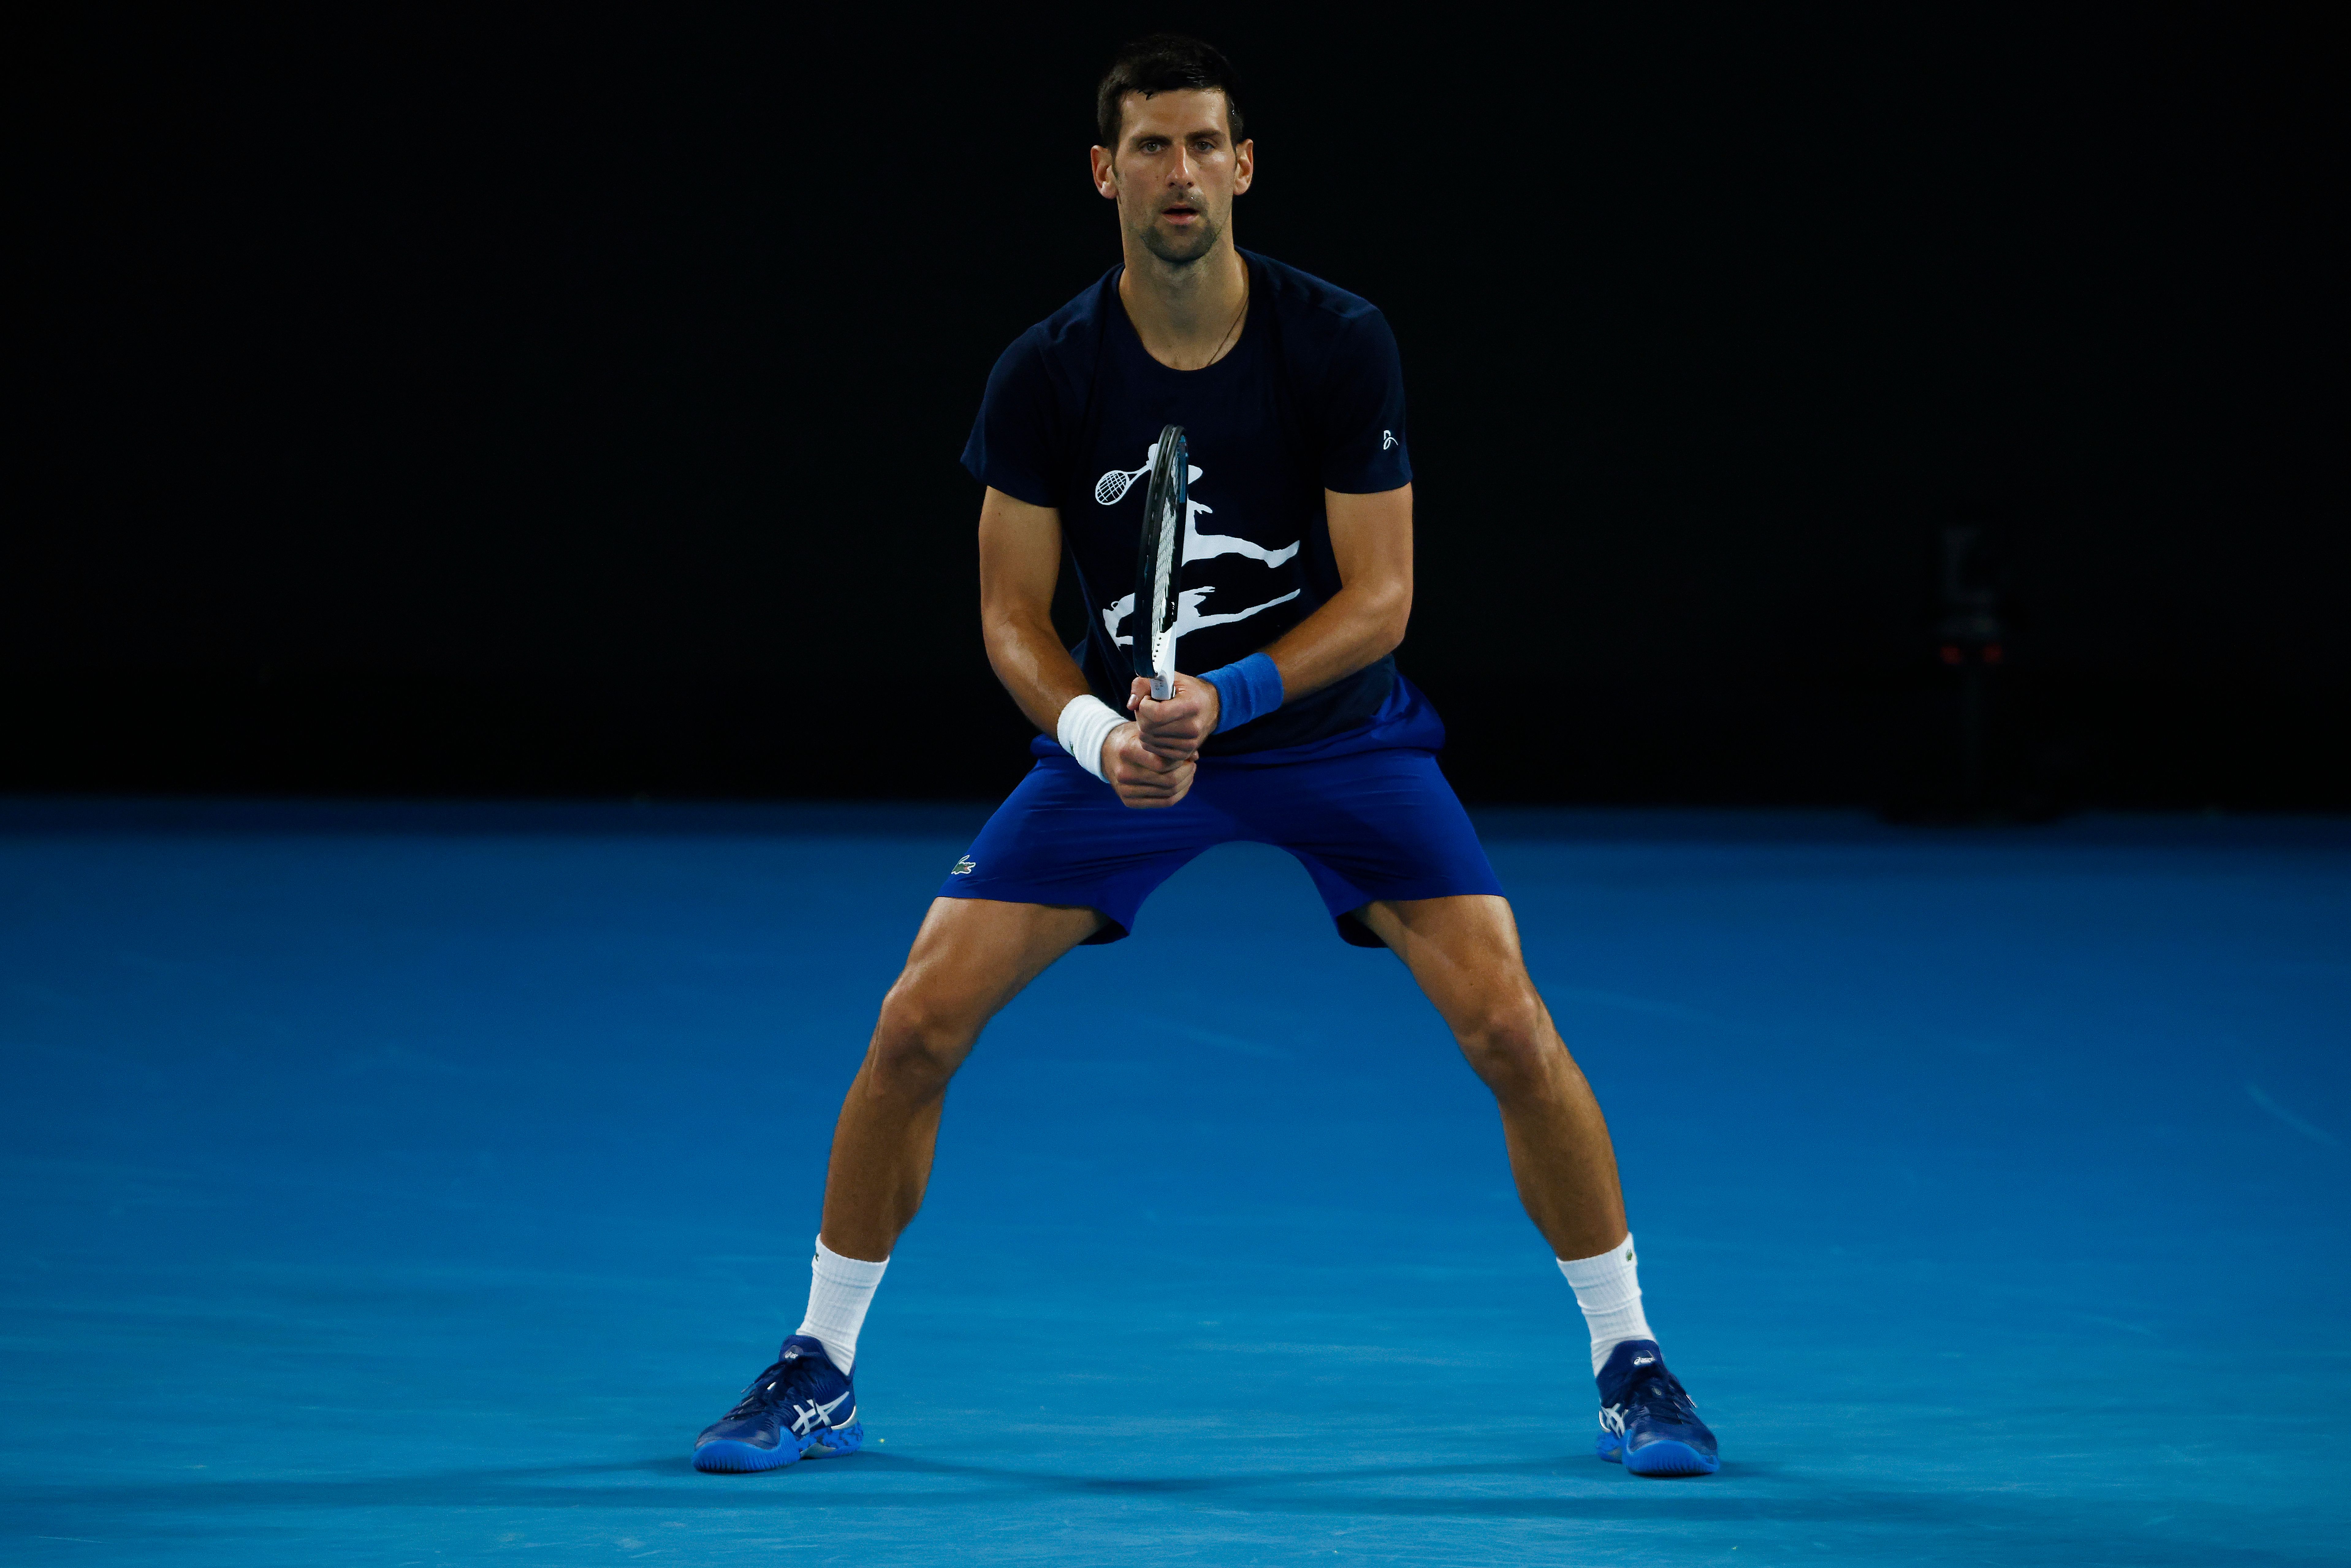 Novak Djokovic of Serbia in action during a practice session ahead of the 2022 Australian Open at Melbourne Park on January 14, 2022 in Melbourne, Australia.